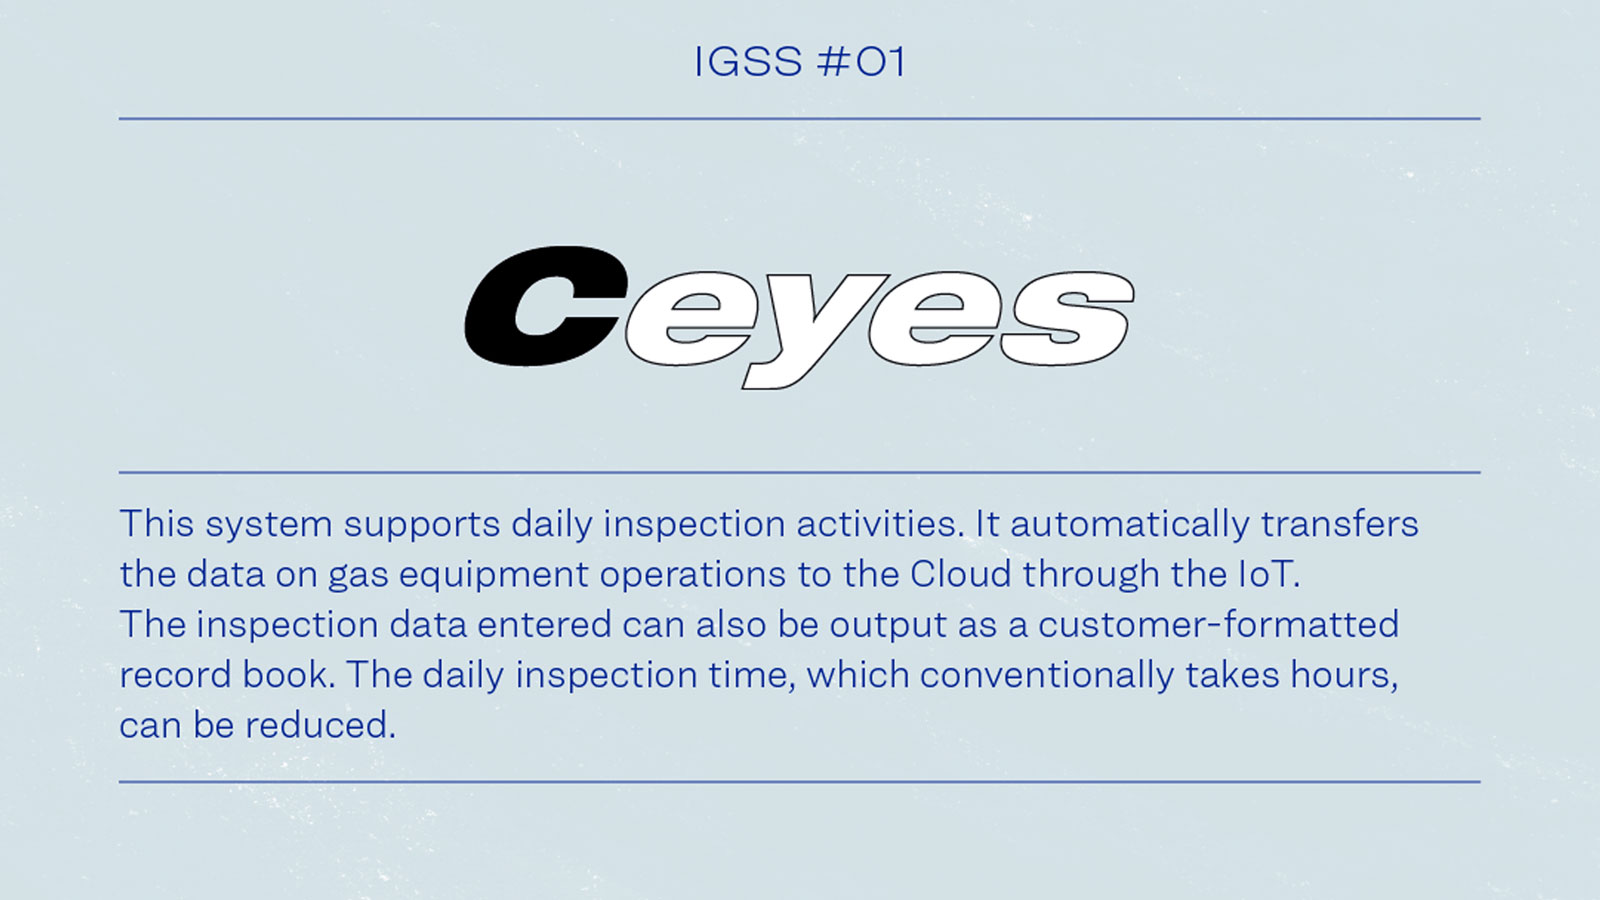 IGSS #01 Ceyes This system supports daily inspection activities. It automatically transfers the data on gas equipment operations to the Cloud through the IoT. This inspection data entered can also be output as a customer-formatted record book. The daily inspection time, which conventionally  takes hours, can be reduced.